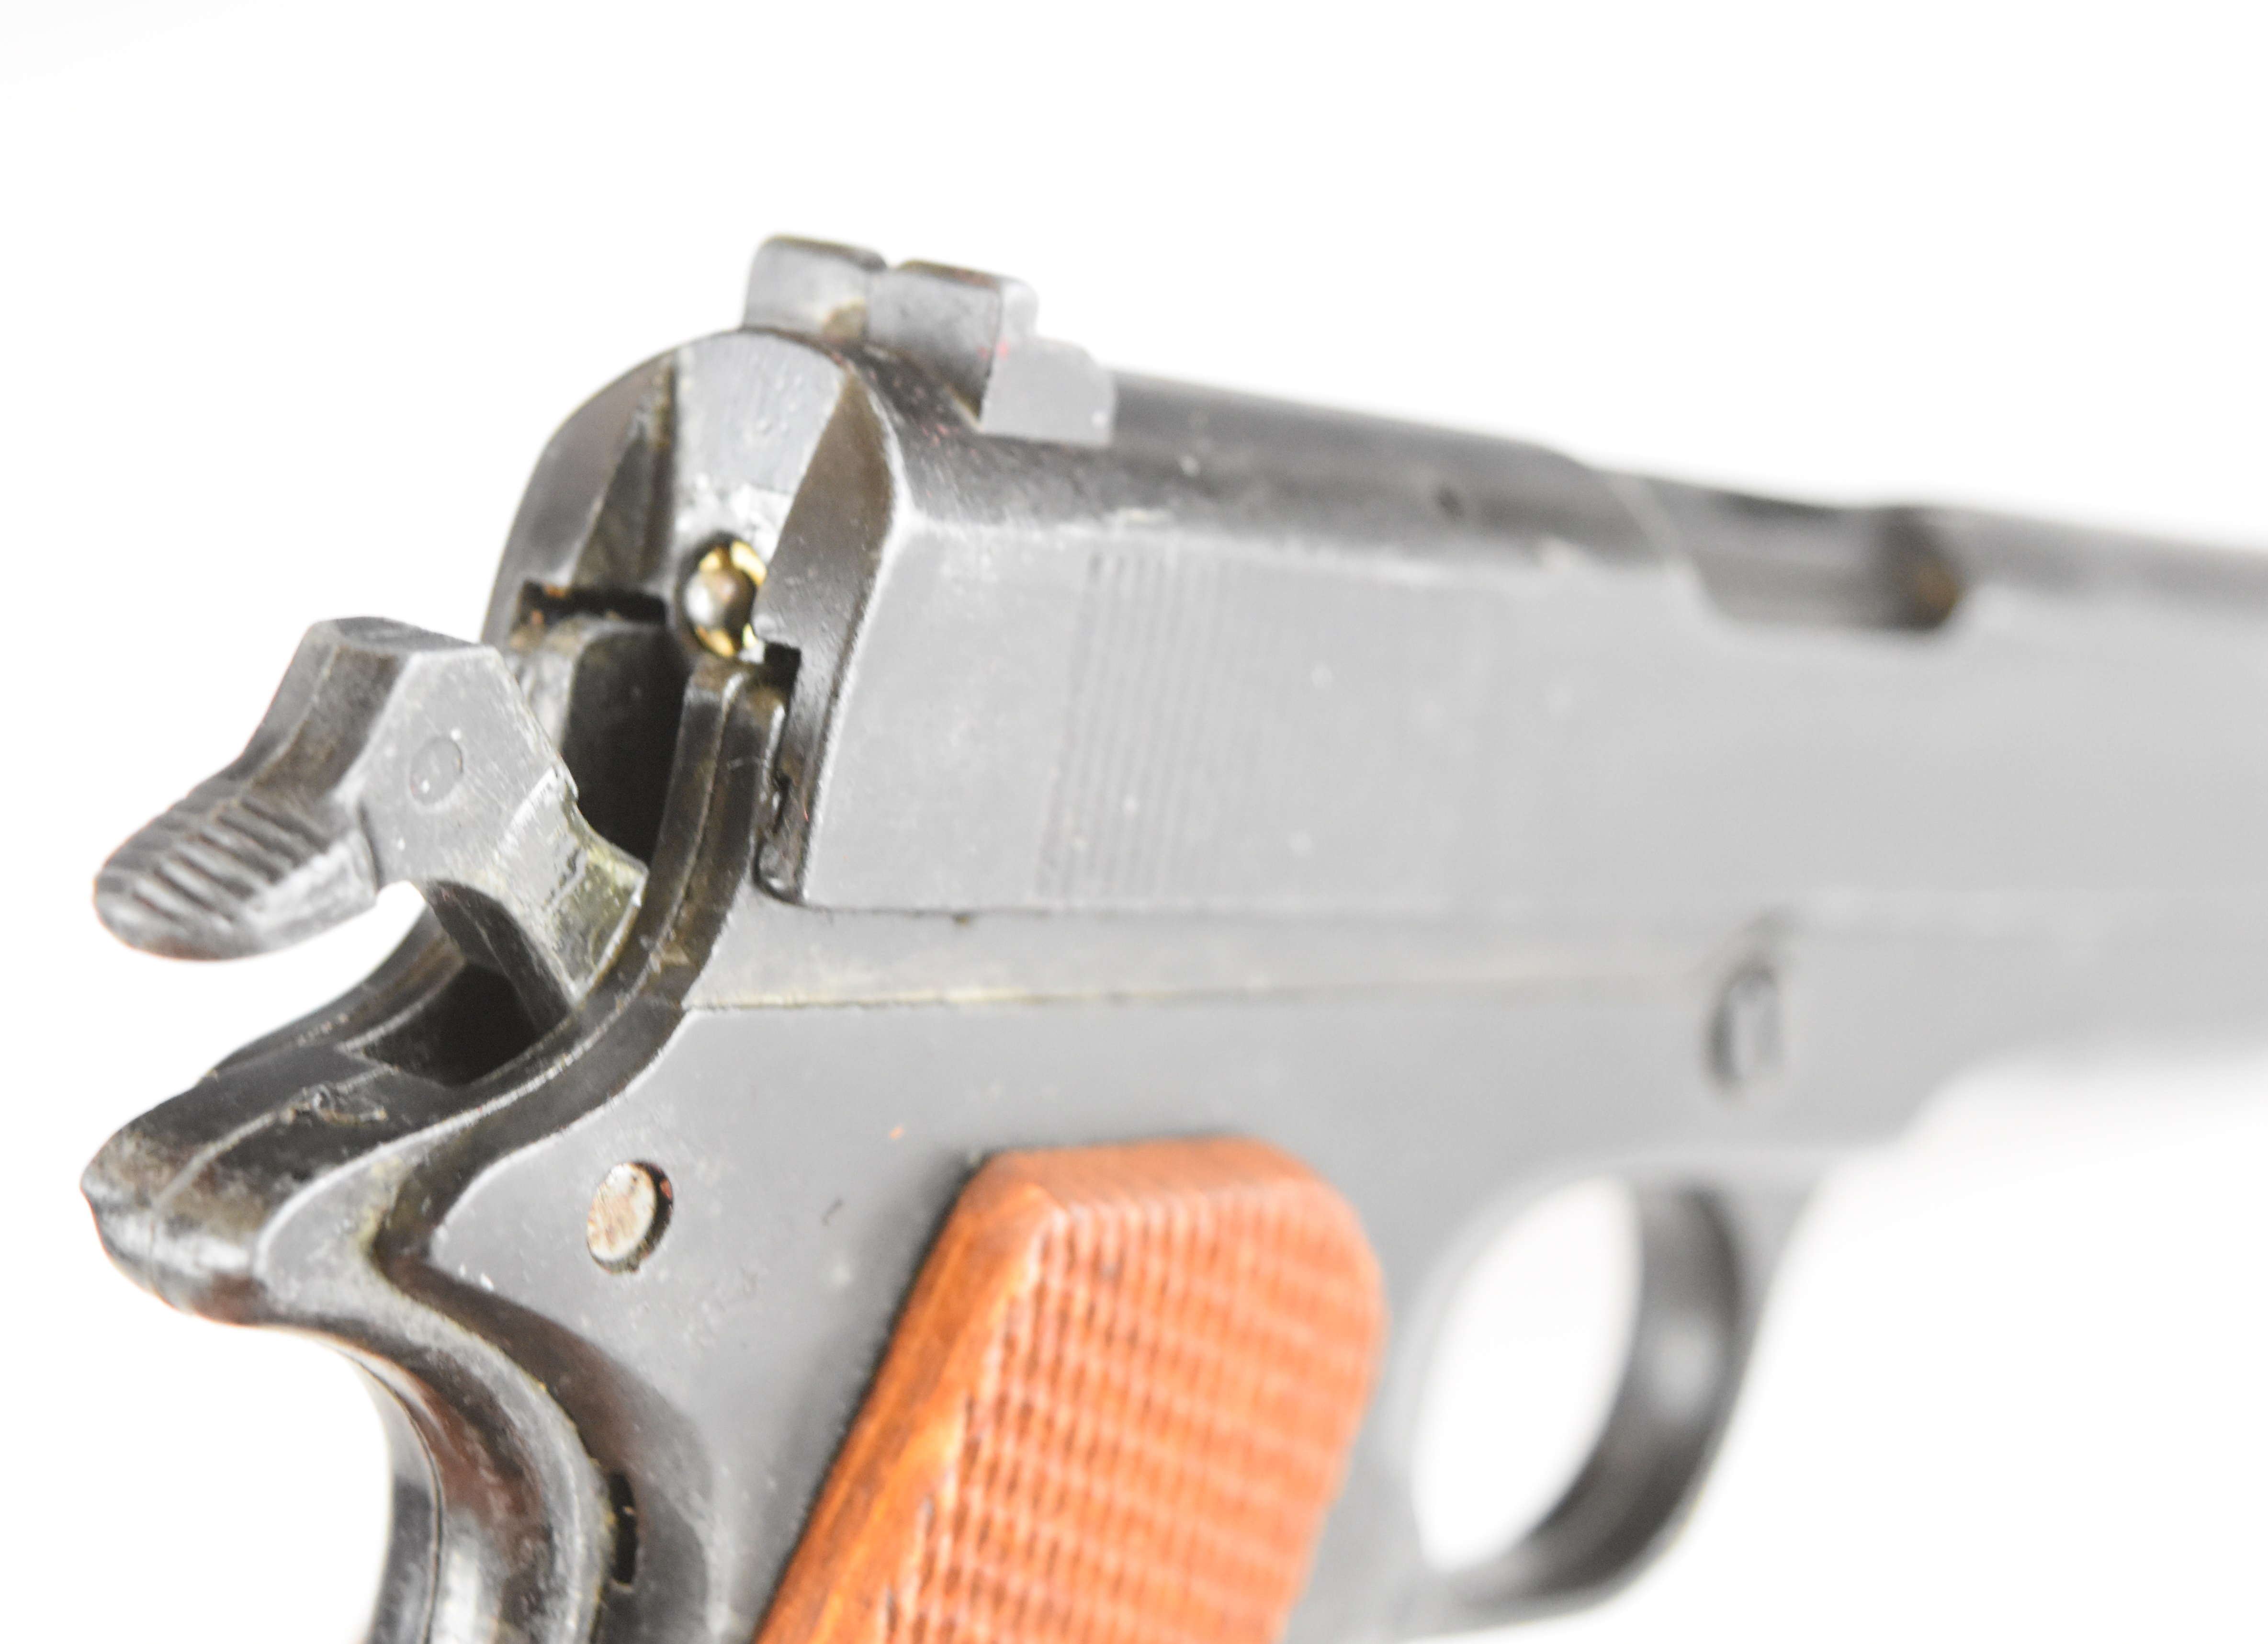 BBM Bruni 8mm blank firing pistol with chequered wooden grips, in original fitted box. - Image 13 of 14